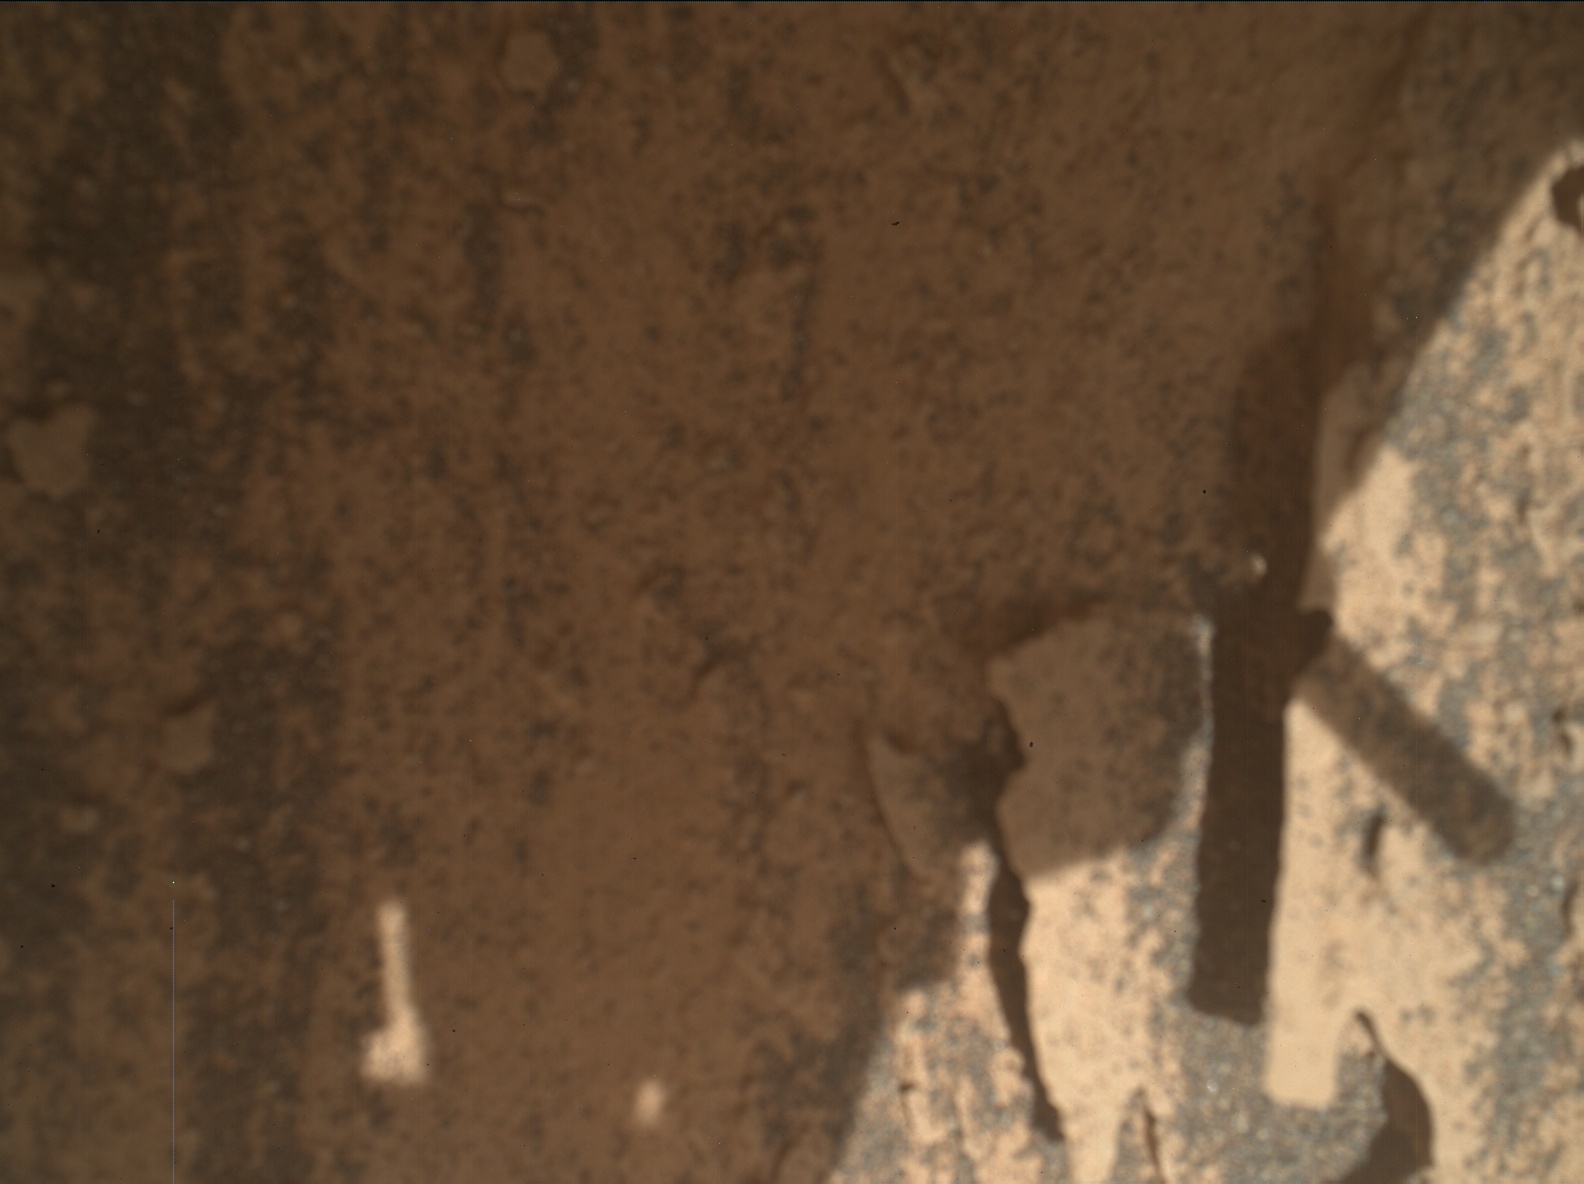 Nasa's Mars rover Curiosity acquired this image using its Mars Hand Lens Imager (MAHLI) on Sol 3326